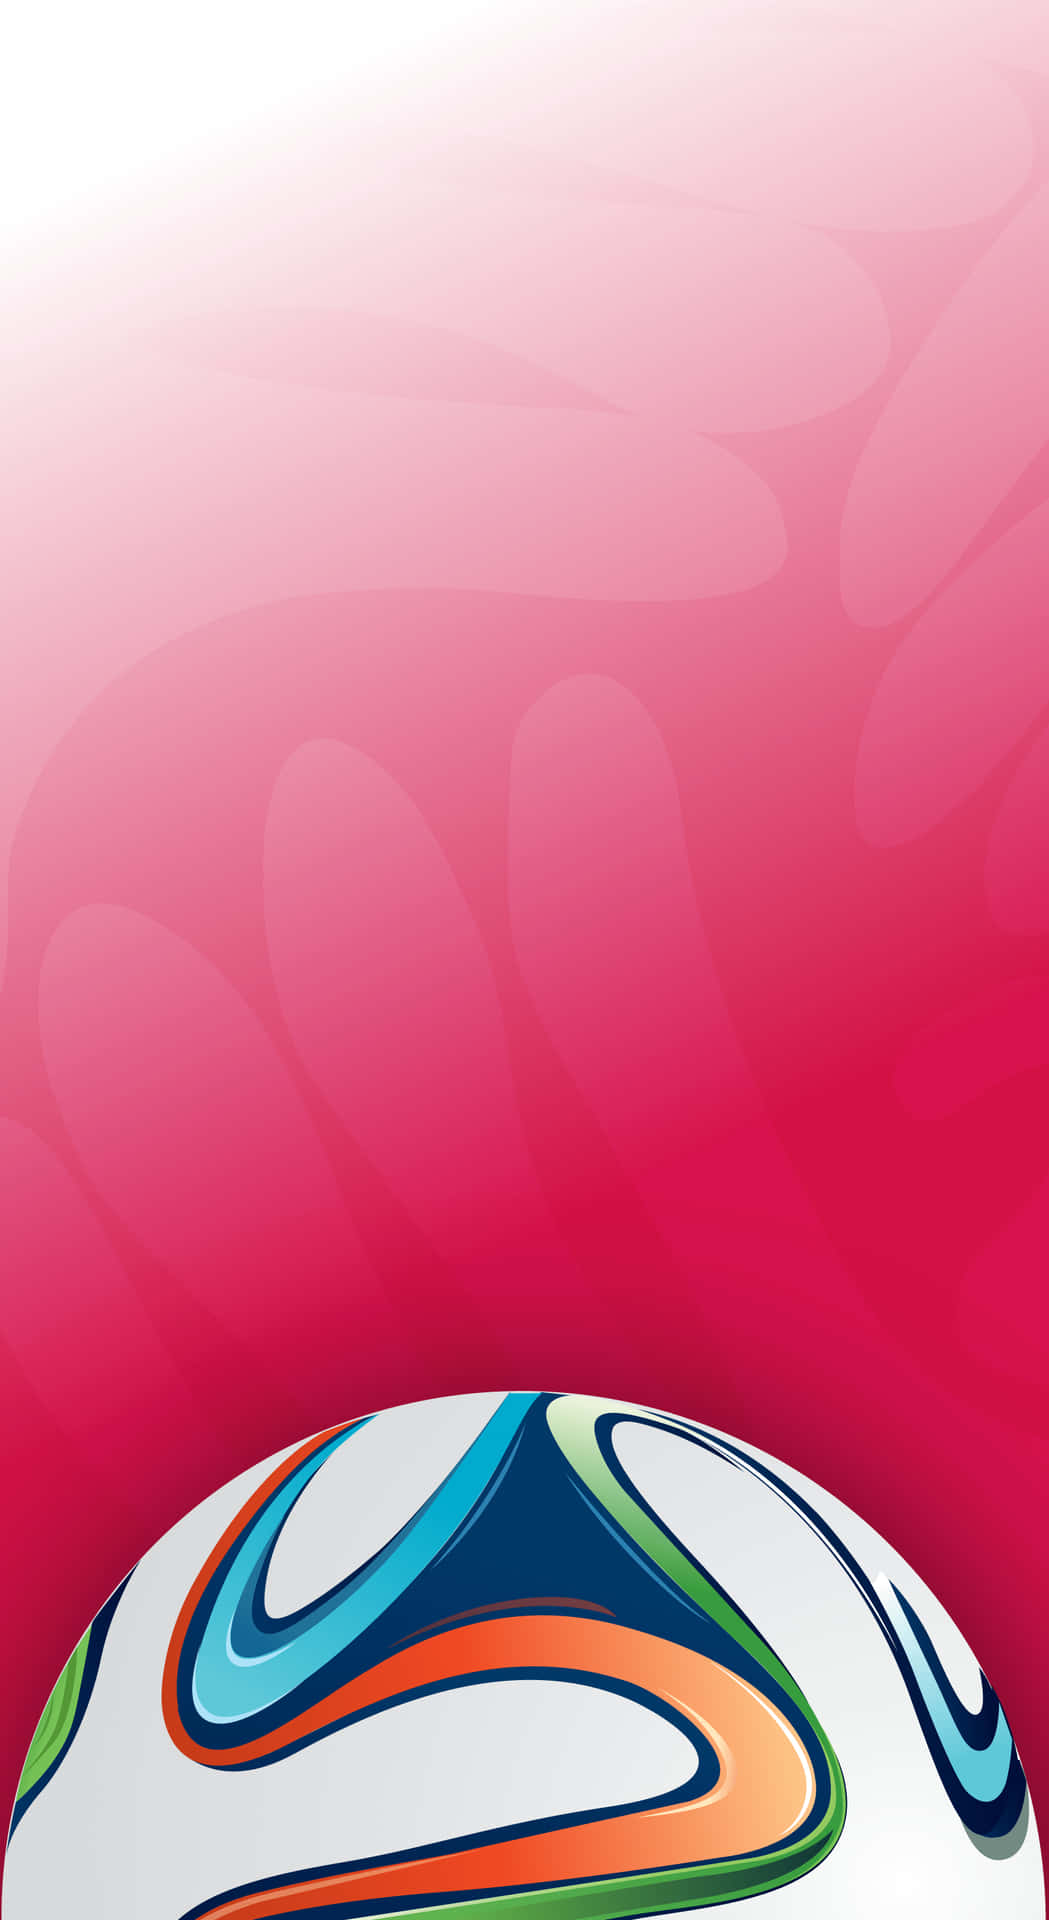 Stay connected to the beautiful game - Soccer anytime, anywhere Wallpaper